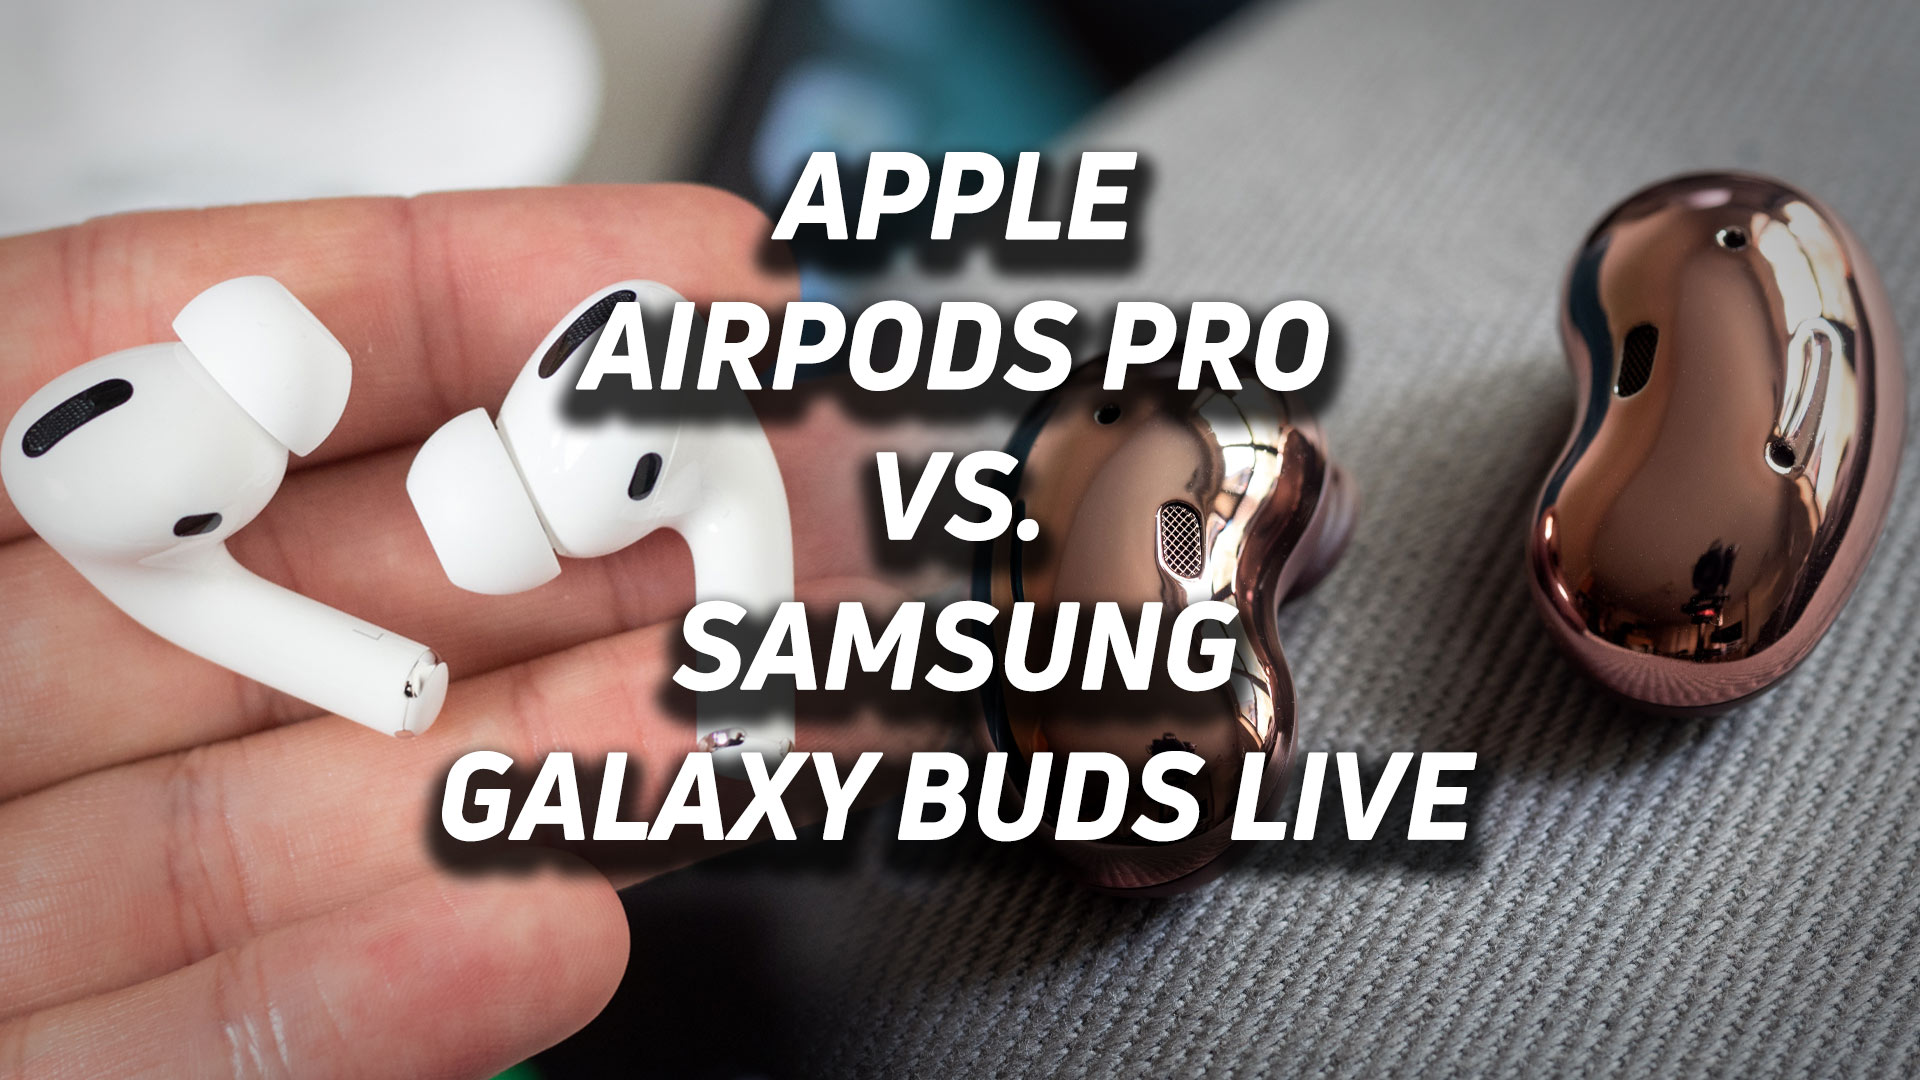 A blended image of the Apple AirPods Pro vs Samsung Galaxy Buds Live with the versus text overlaid in white.